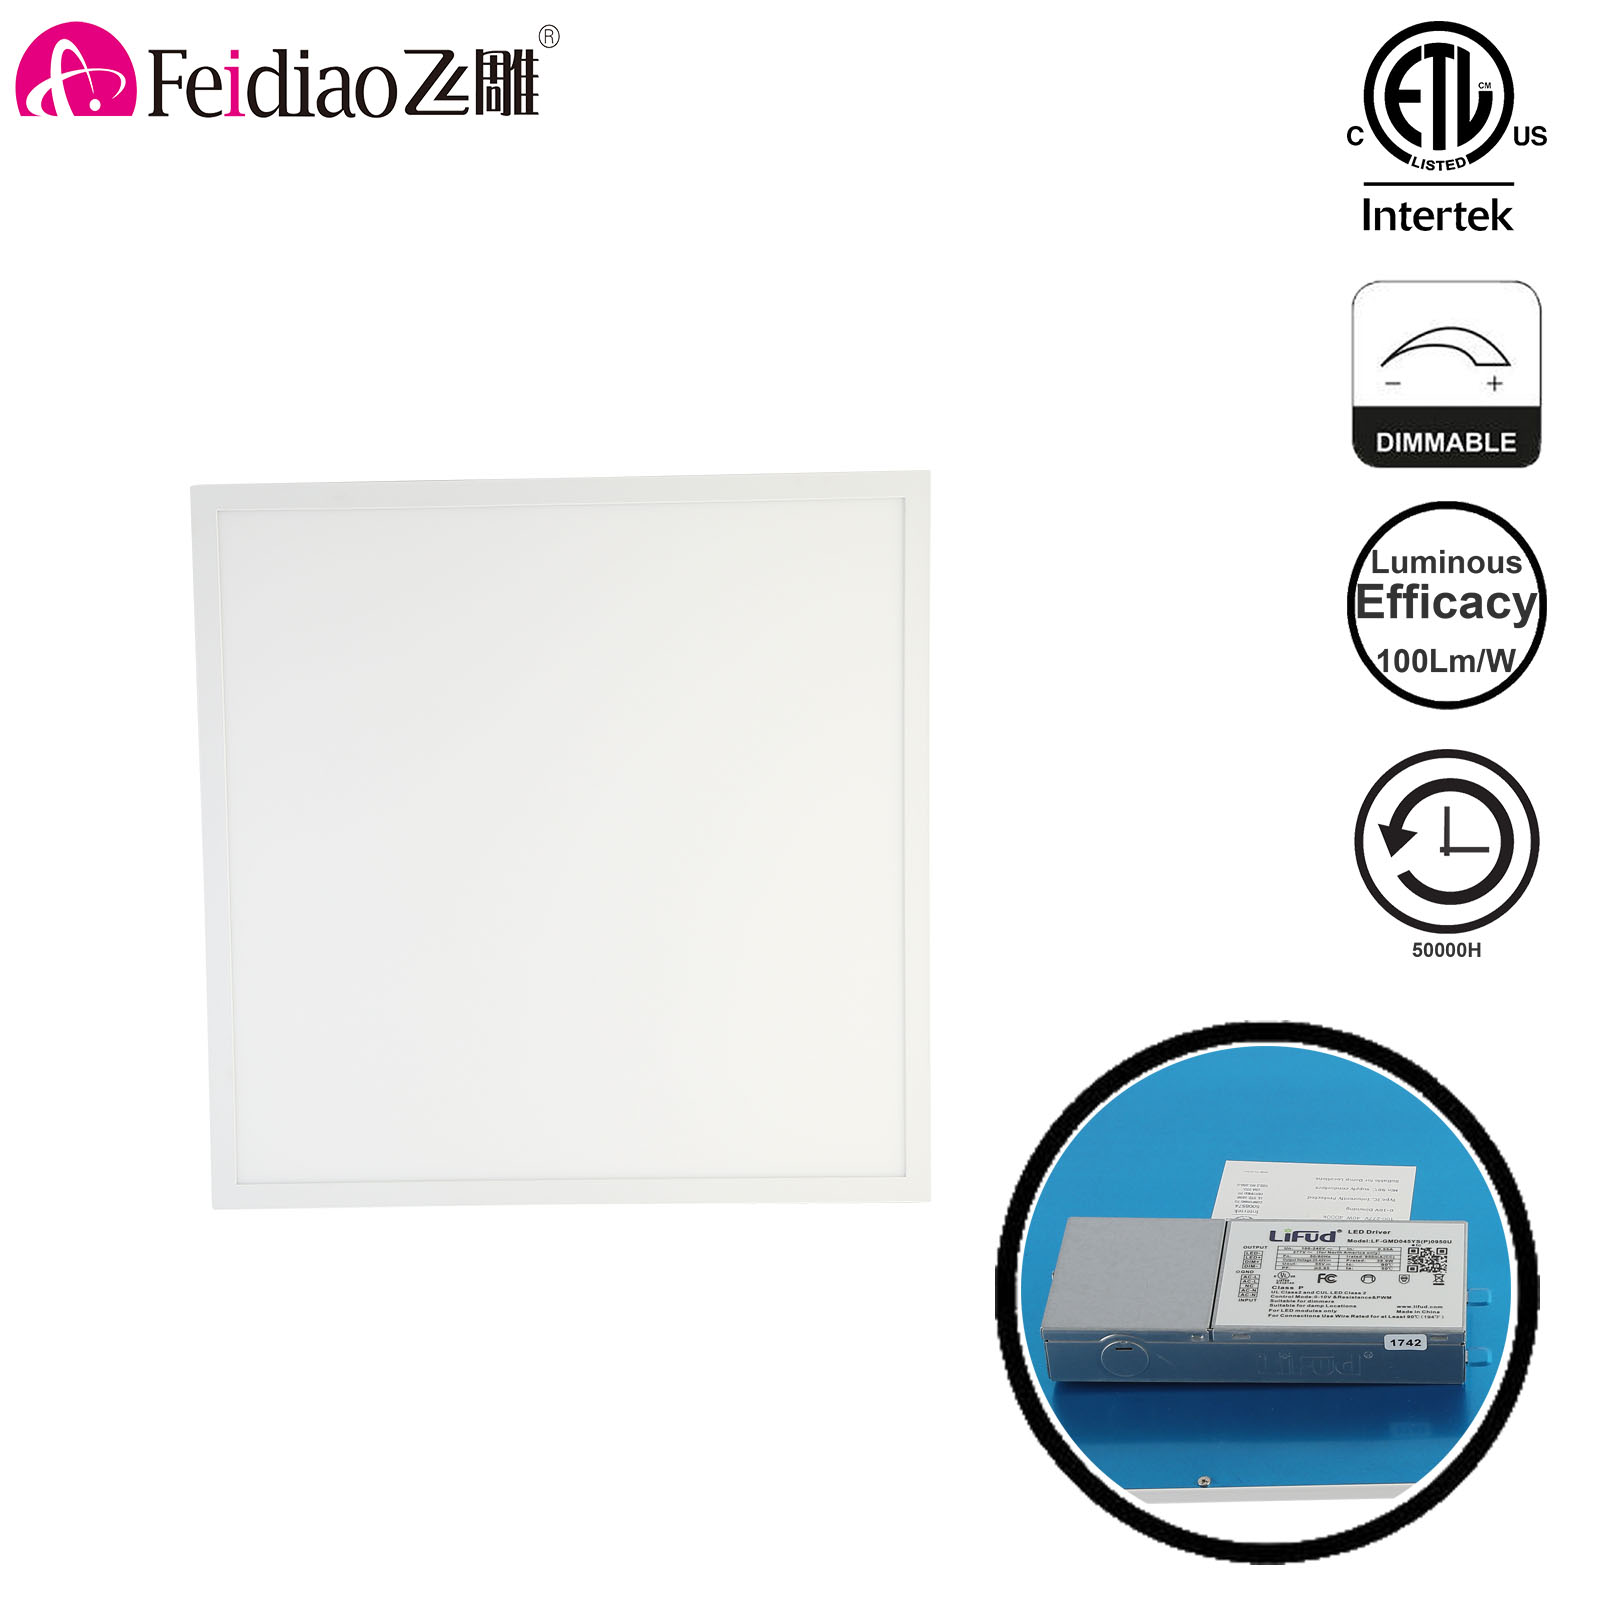 LED Panel 2x2 Dimmable Edge-Lit Flat 40W Warm White 4000 lm cETL Listed DLC Certified troffer light